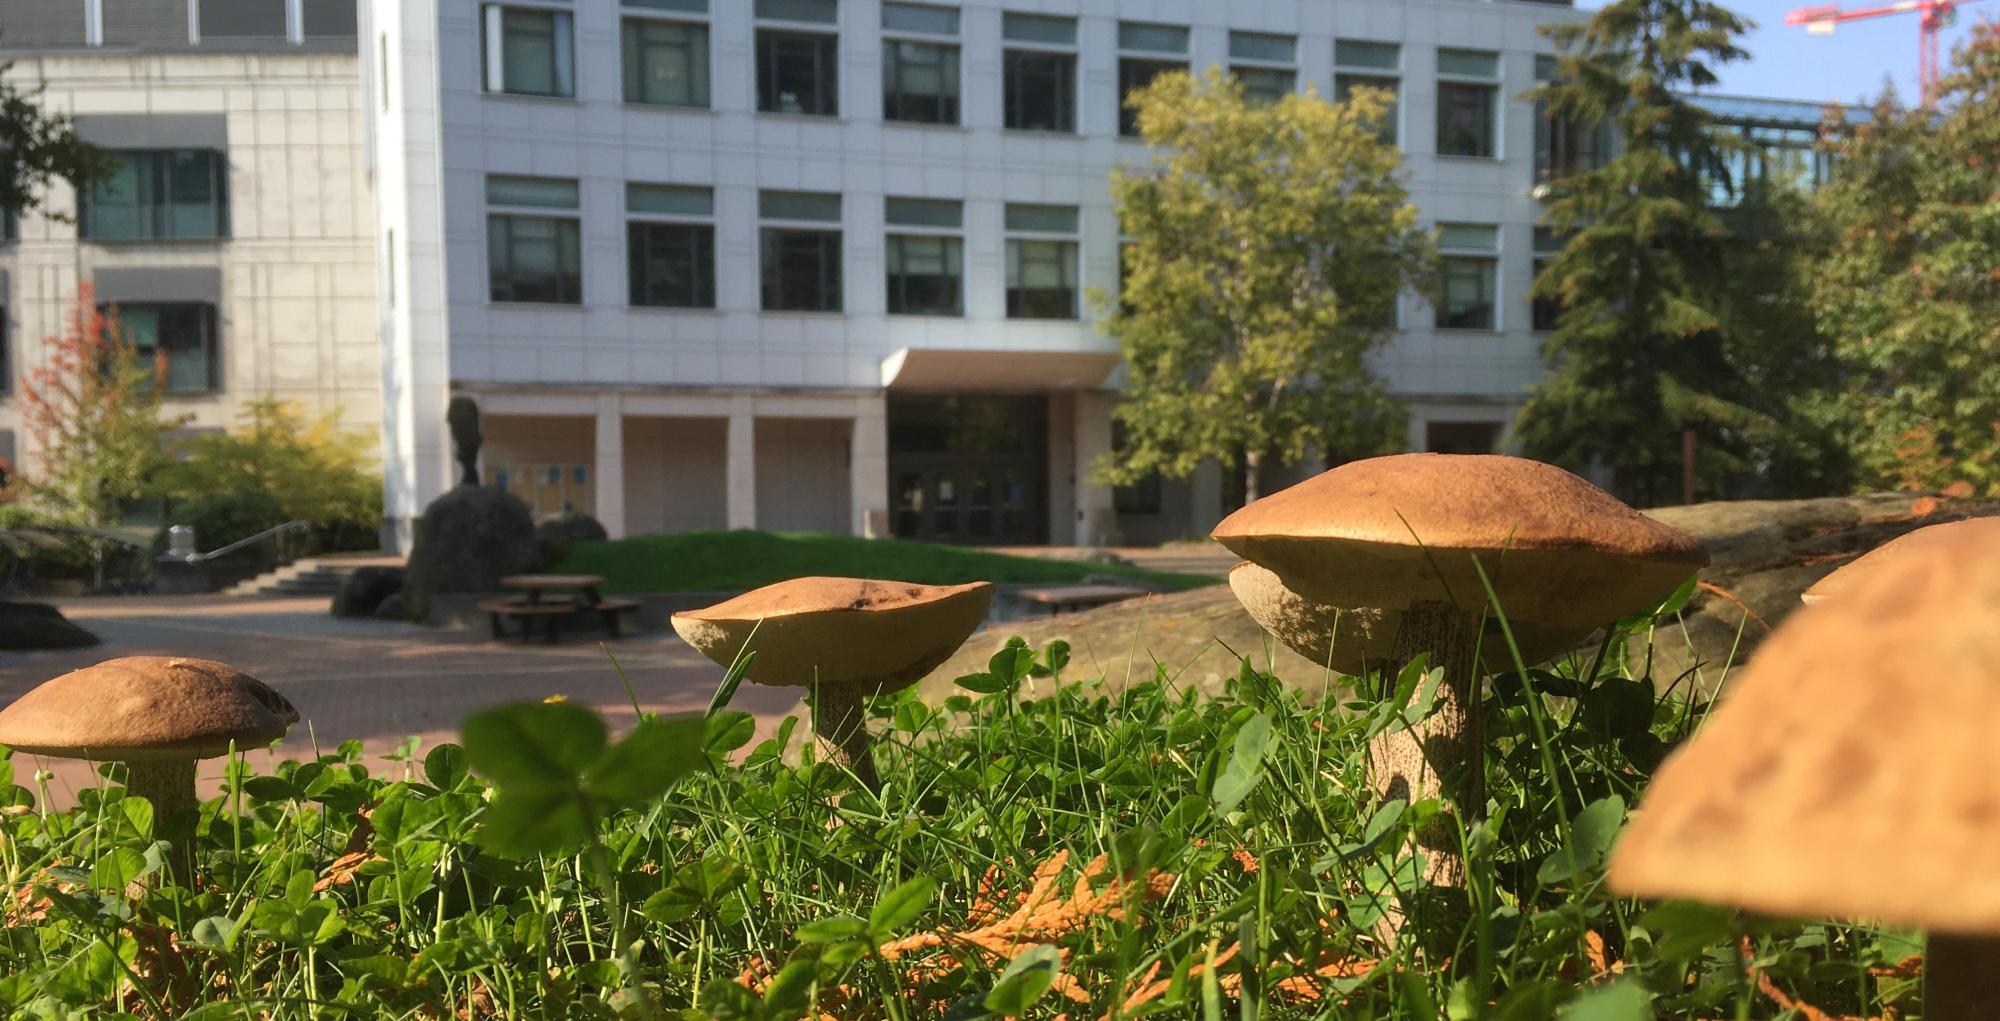 Boletus mushrooms with the Biology Building in the background.